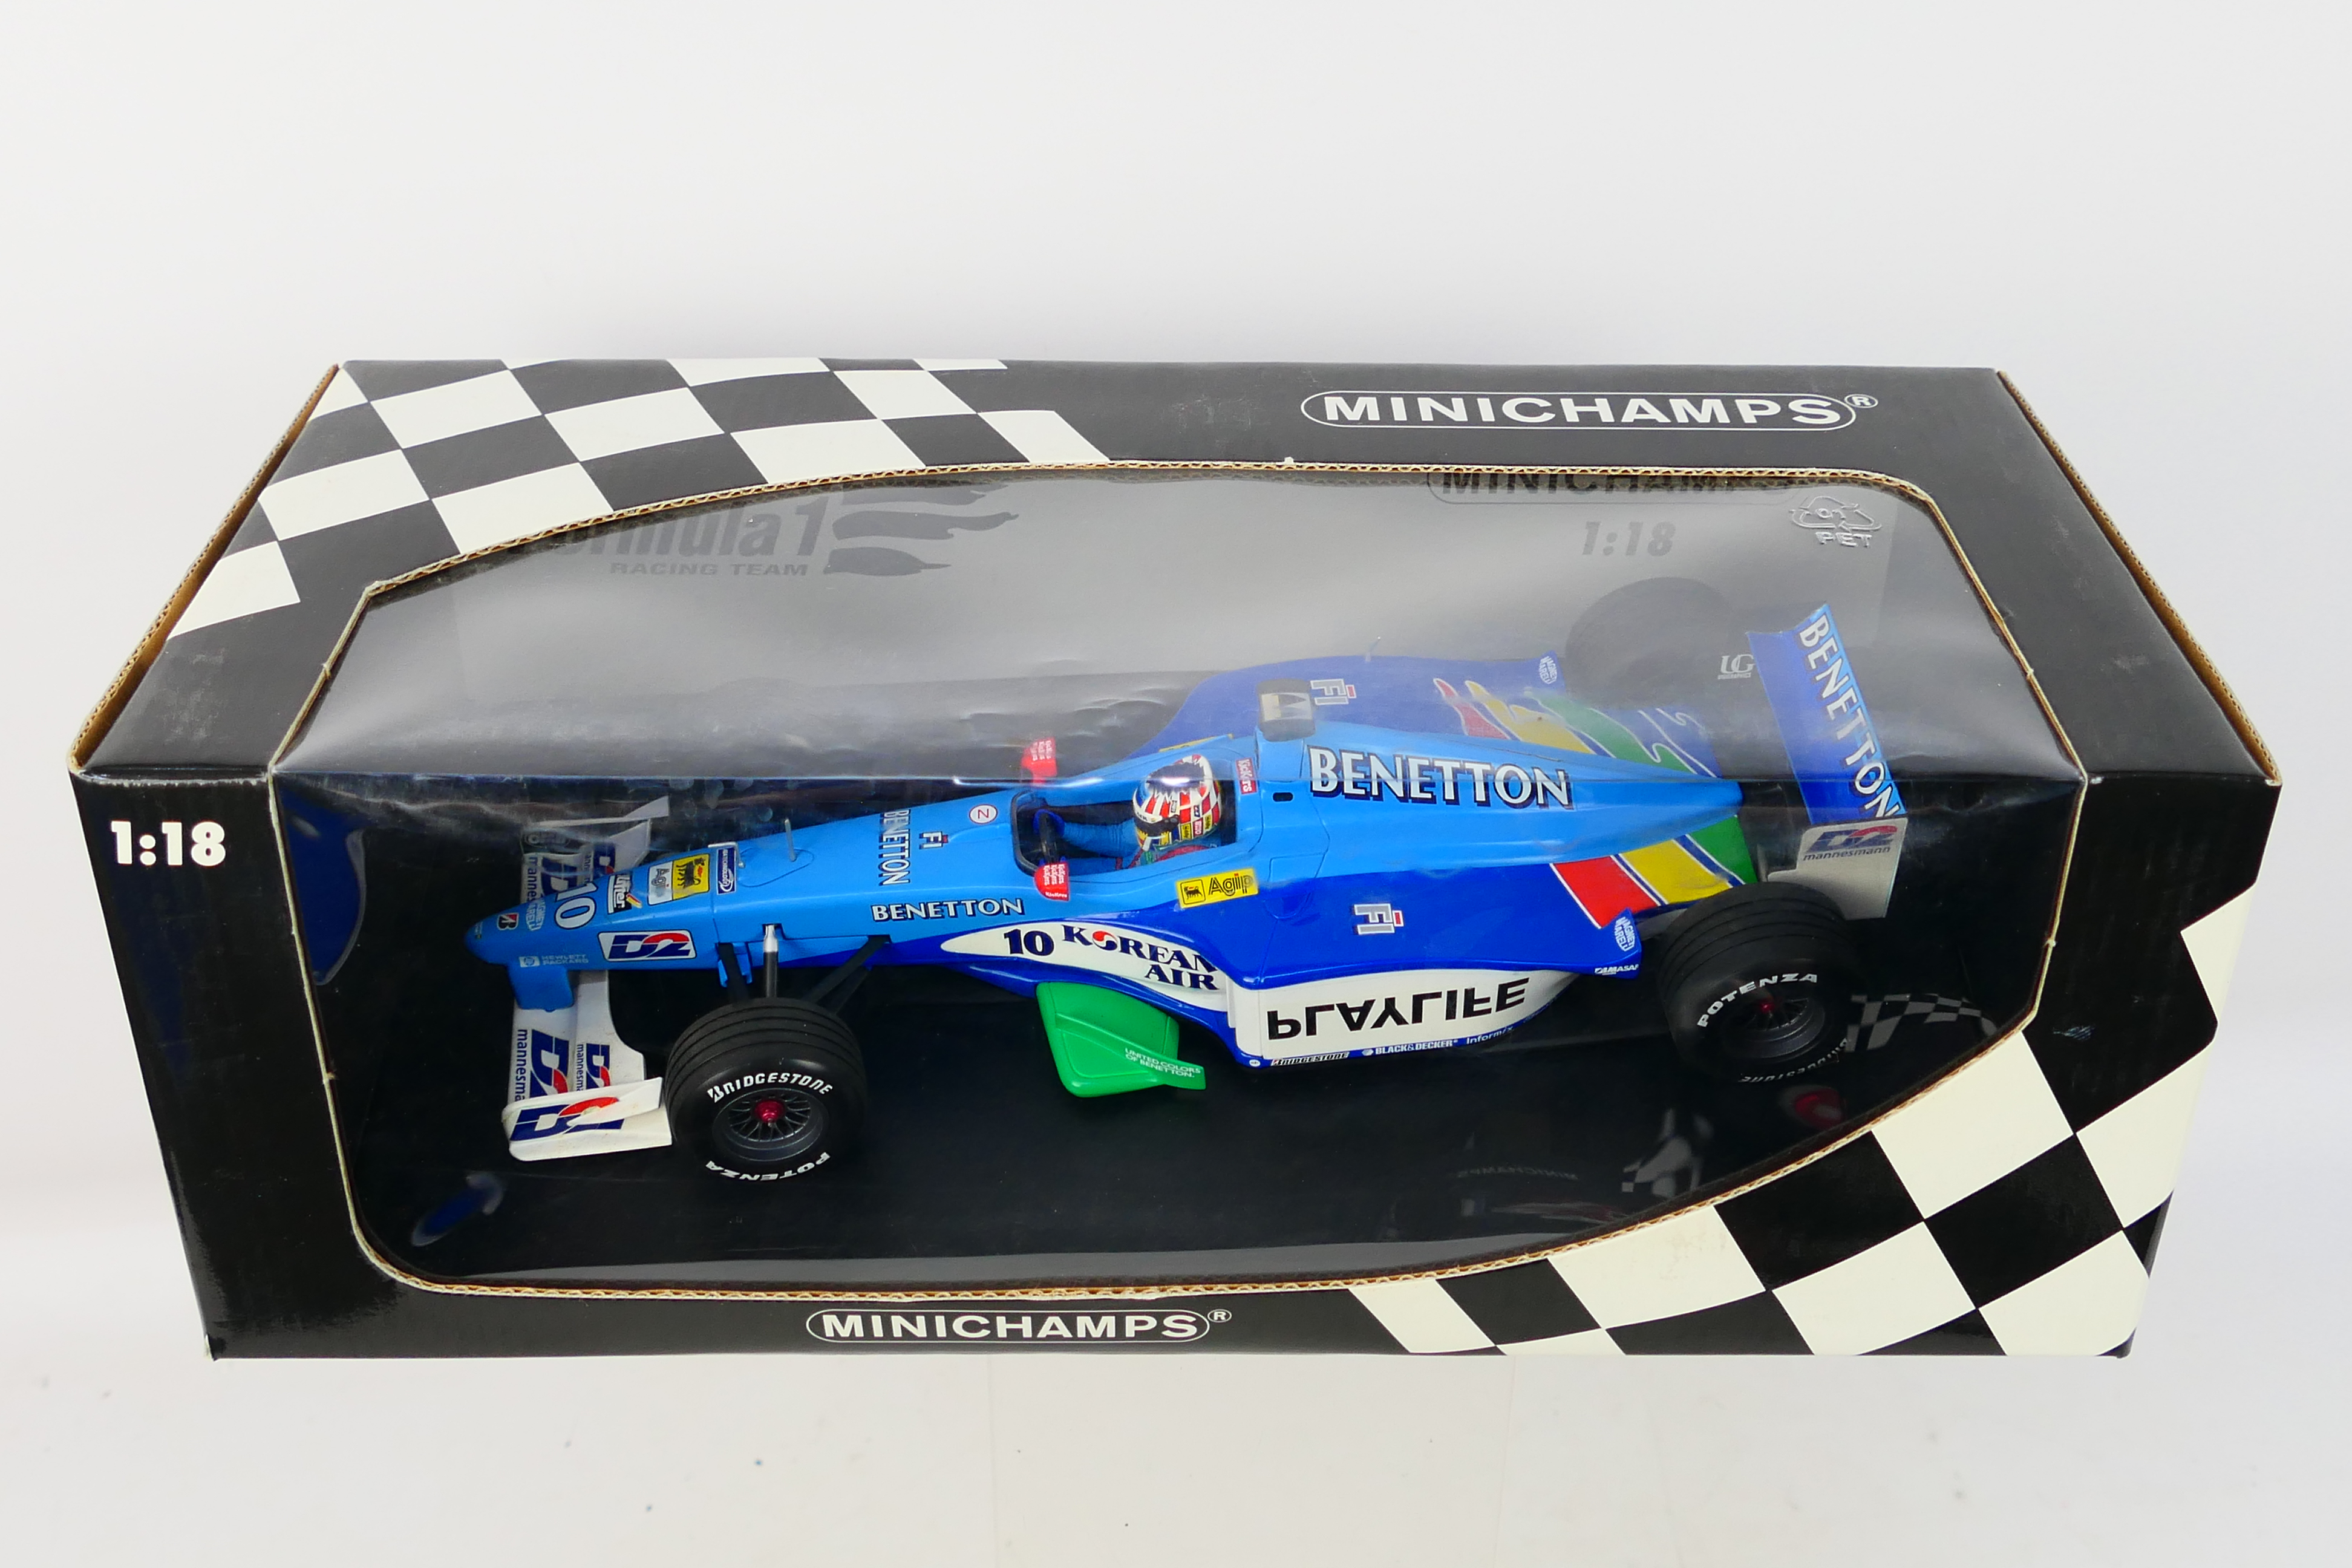 Minichamps- A boxed 1:18 scale Benetton Formula 1 Playlife B199 Alexander Wurz 1999 car which - Image 3 of 3